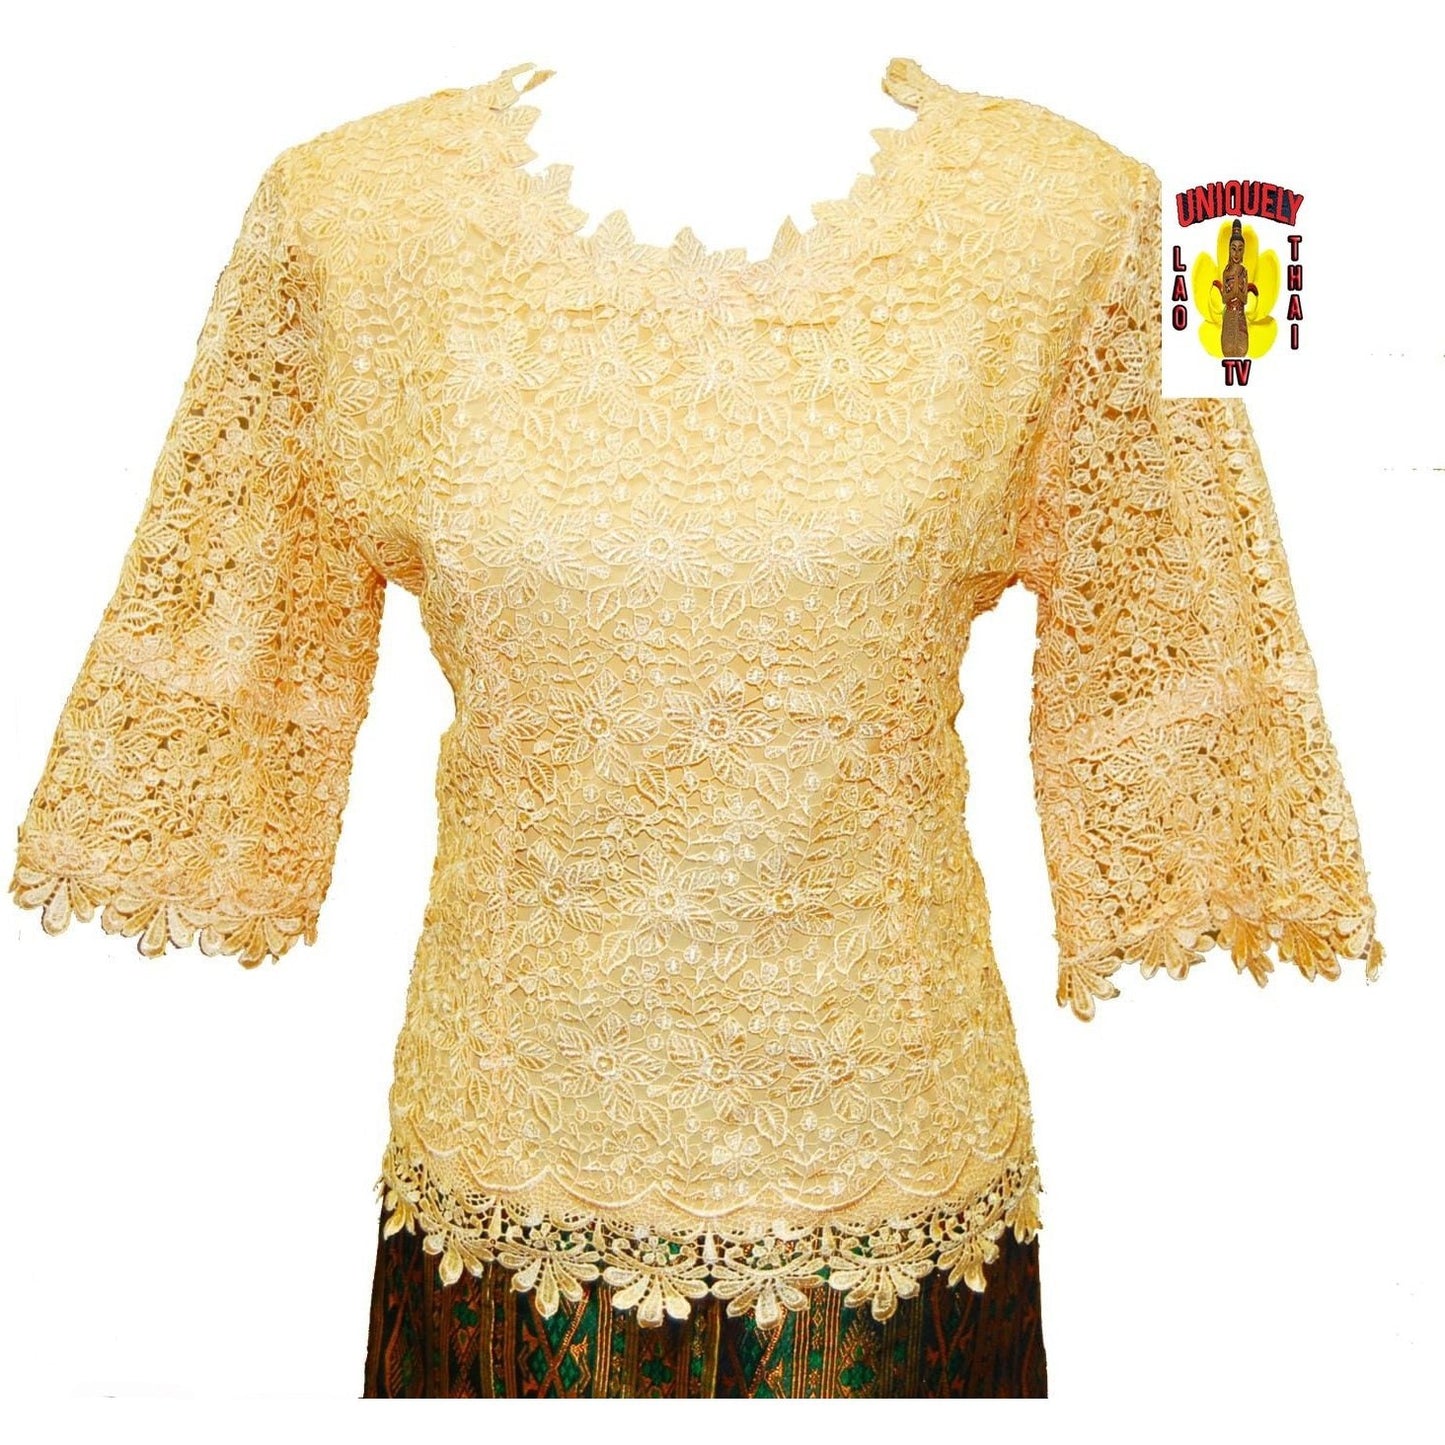 Traditional Thai Laos Lace Blouse Light Yellow